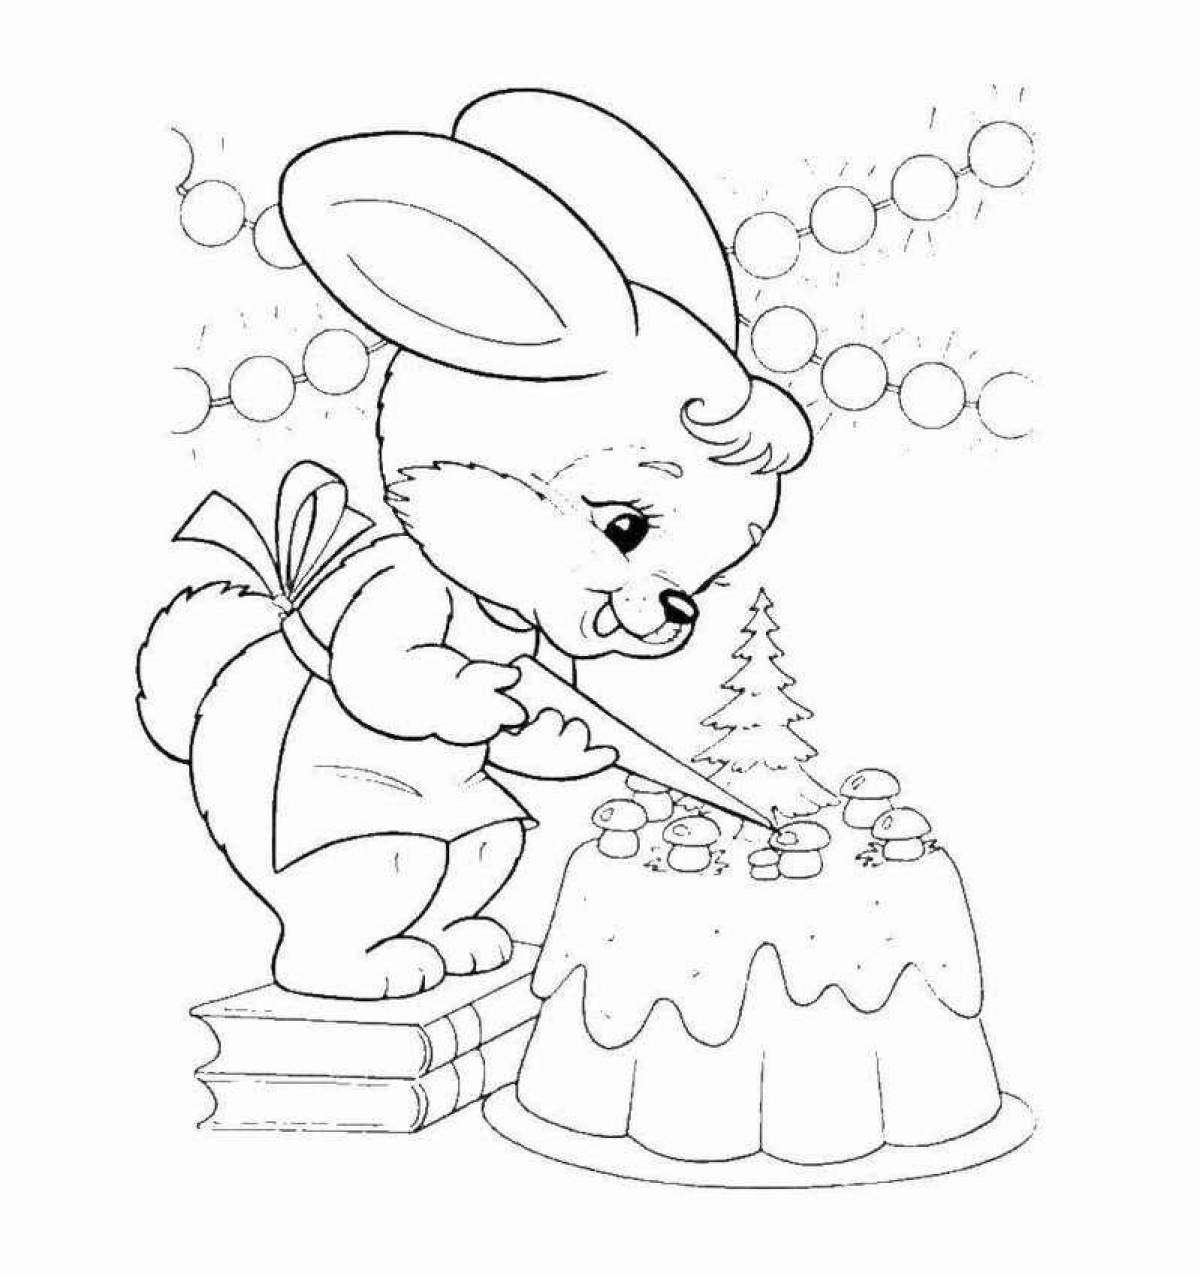 Live coloring hare 2023 new year